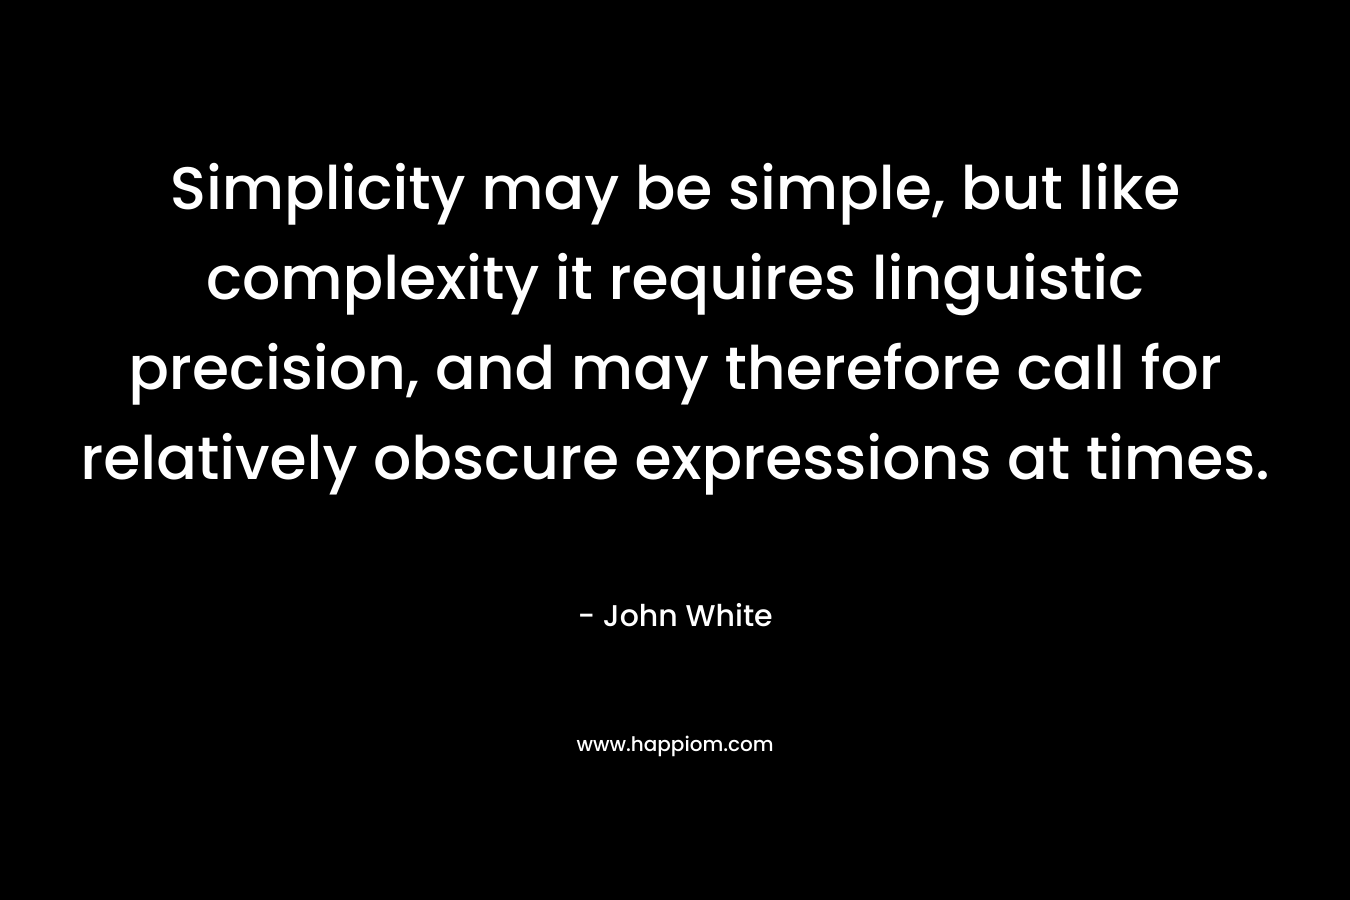 Simplicity may be simple, but like complexity it requires linguistic precision, and may therefore call for relatively obscure expressions at times.